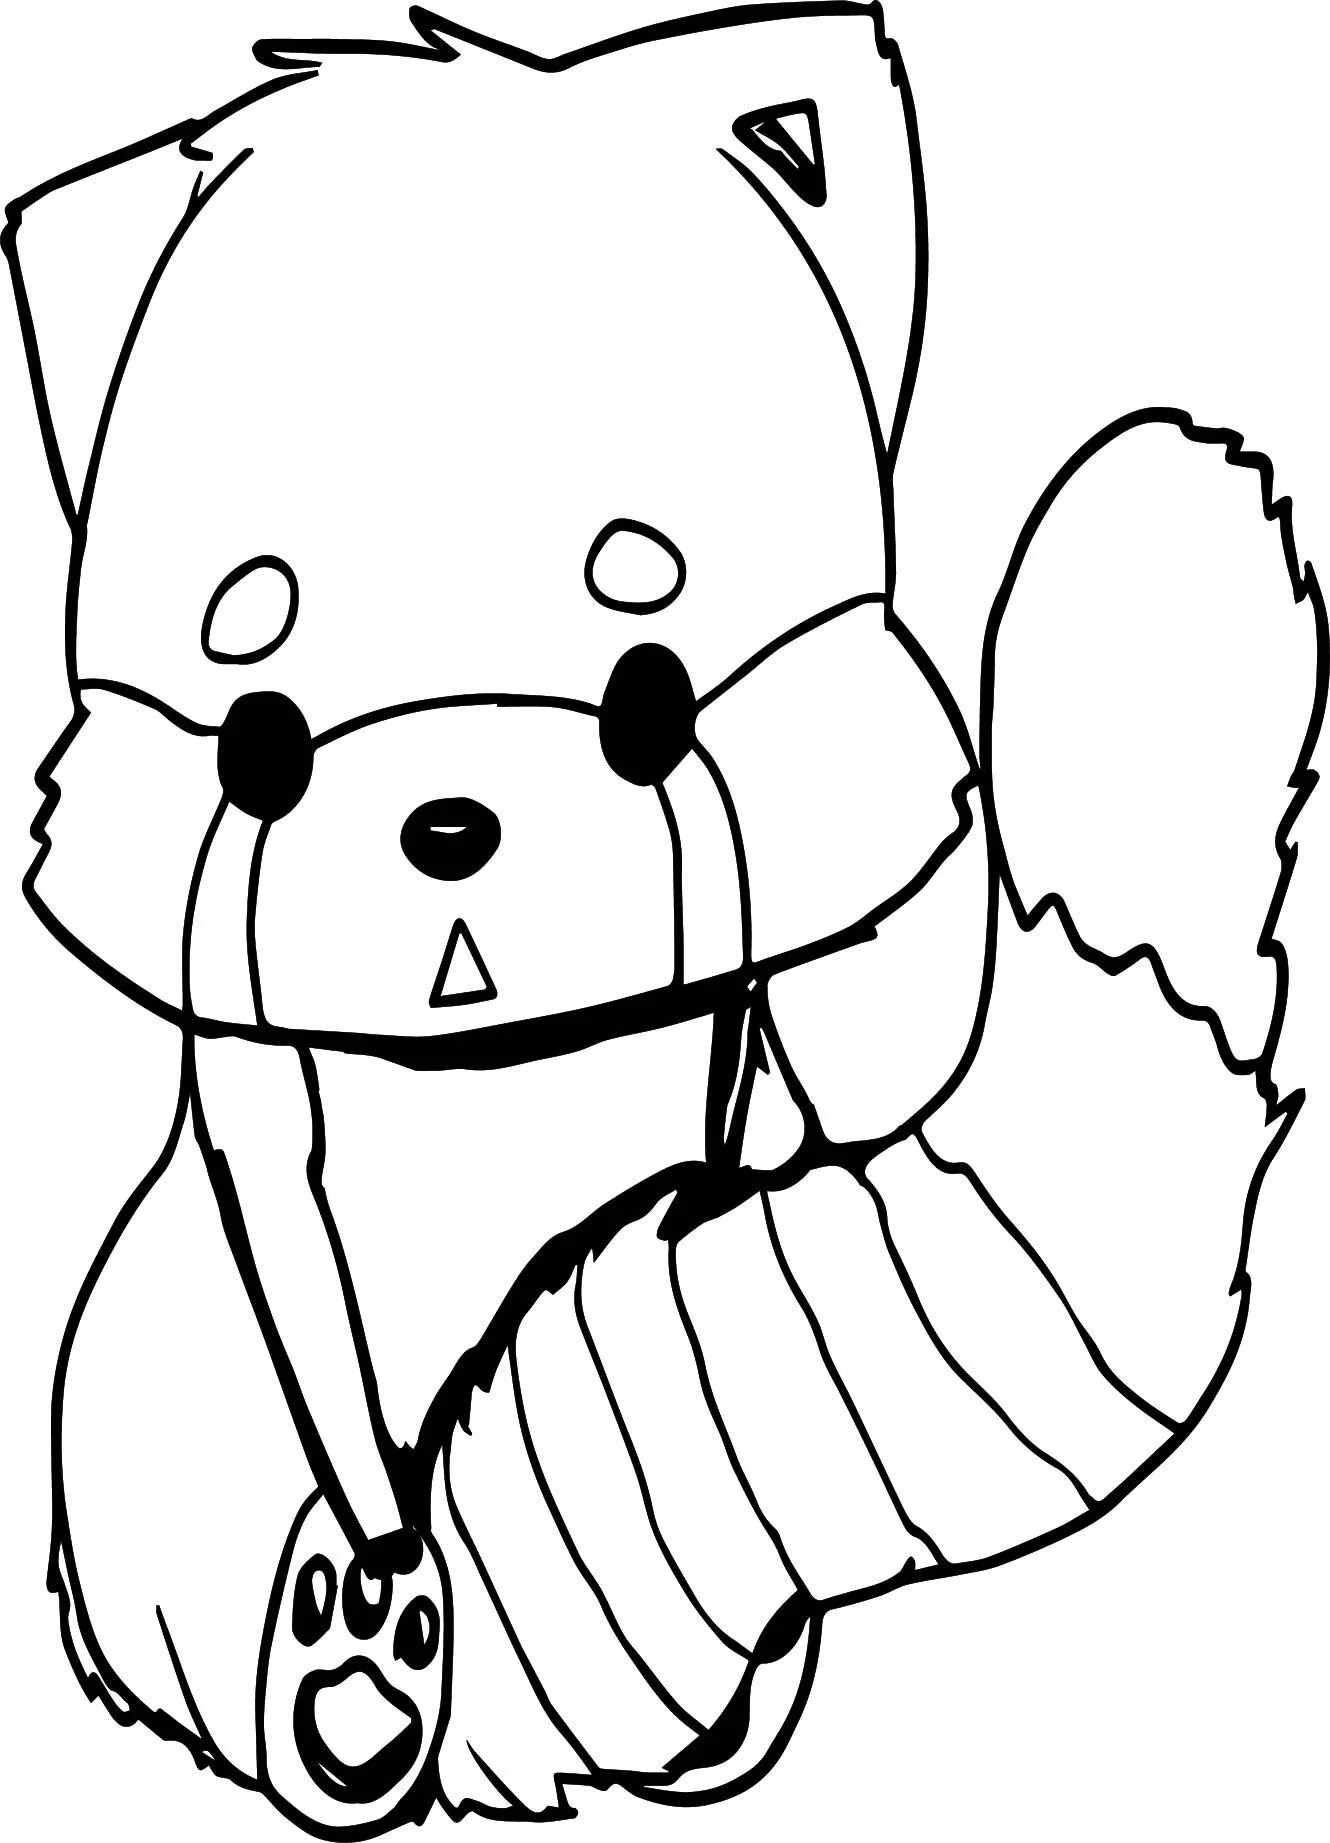 Humorous anime beasts coloring book